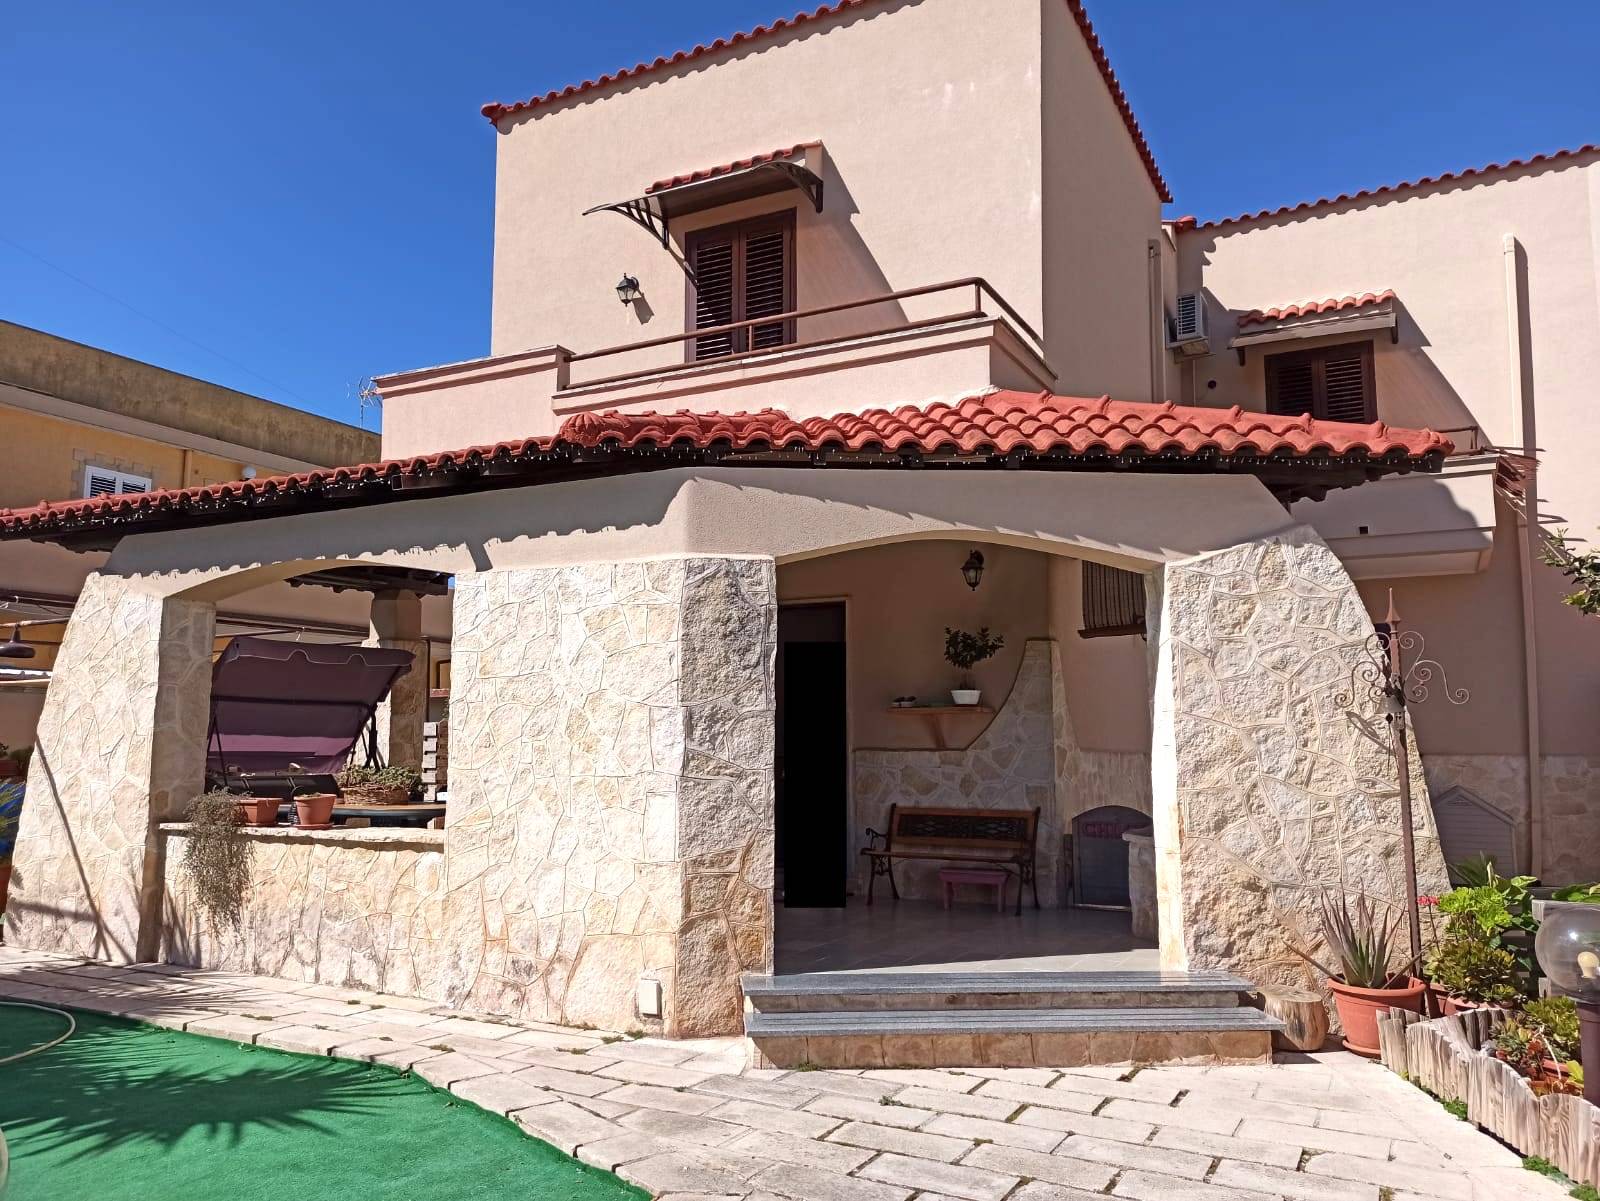 GANDOLI, LEPORANO, Duplex villa for sale of 154 Sq. mt., Excellent Condition, Heating Individual heating system, Energetic class: E, composed by: 5 